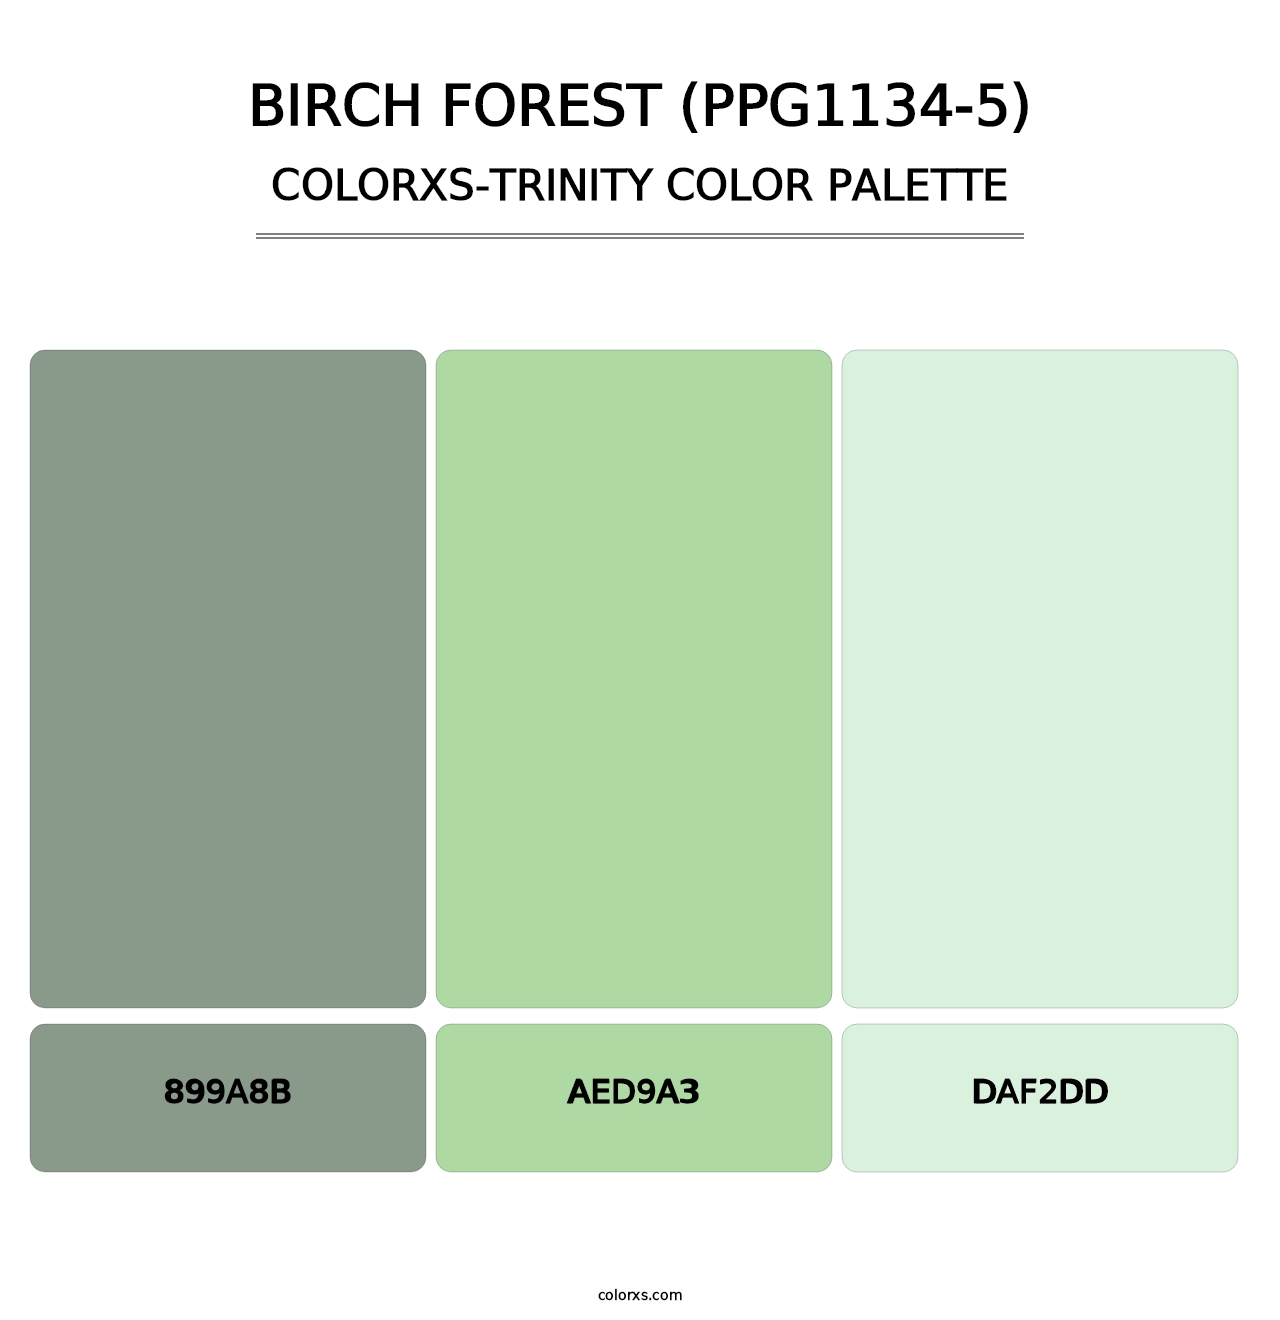 Birch Forest (PPG1134-5) - Colorxs Trinity Palette